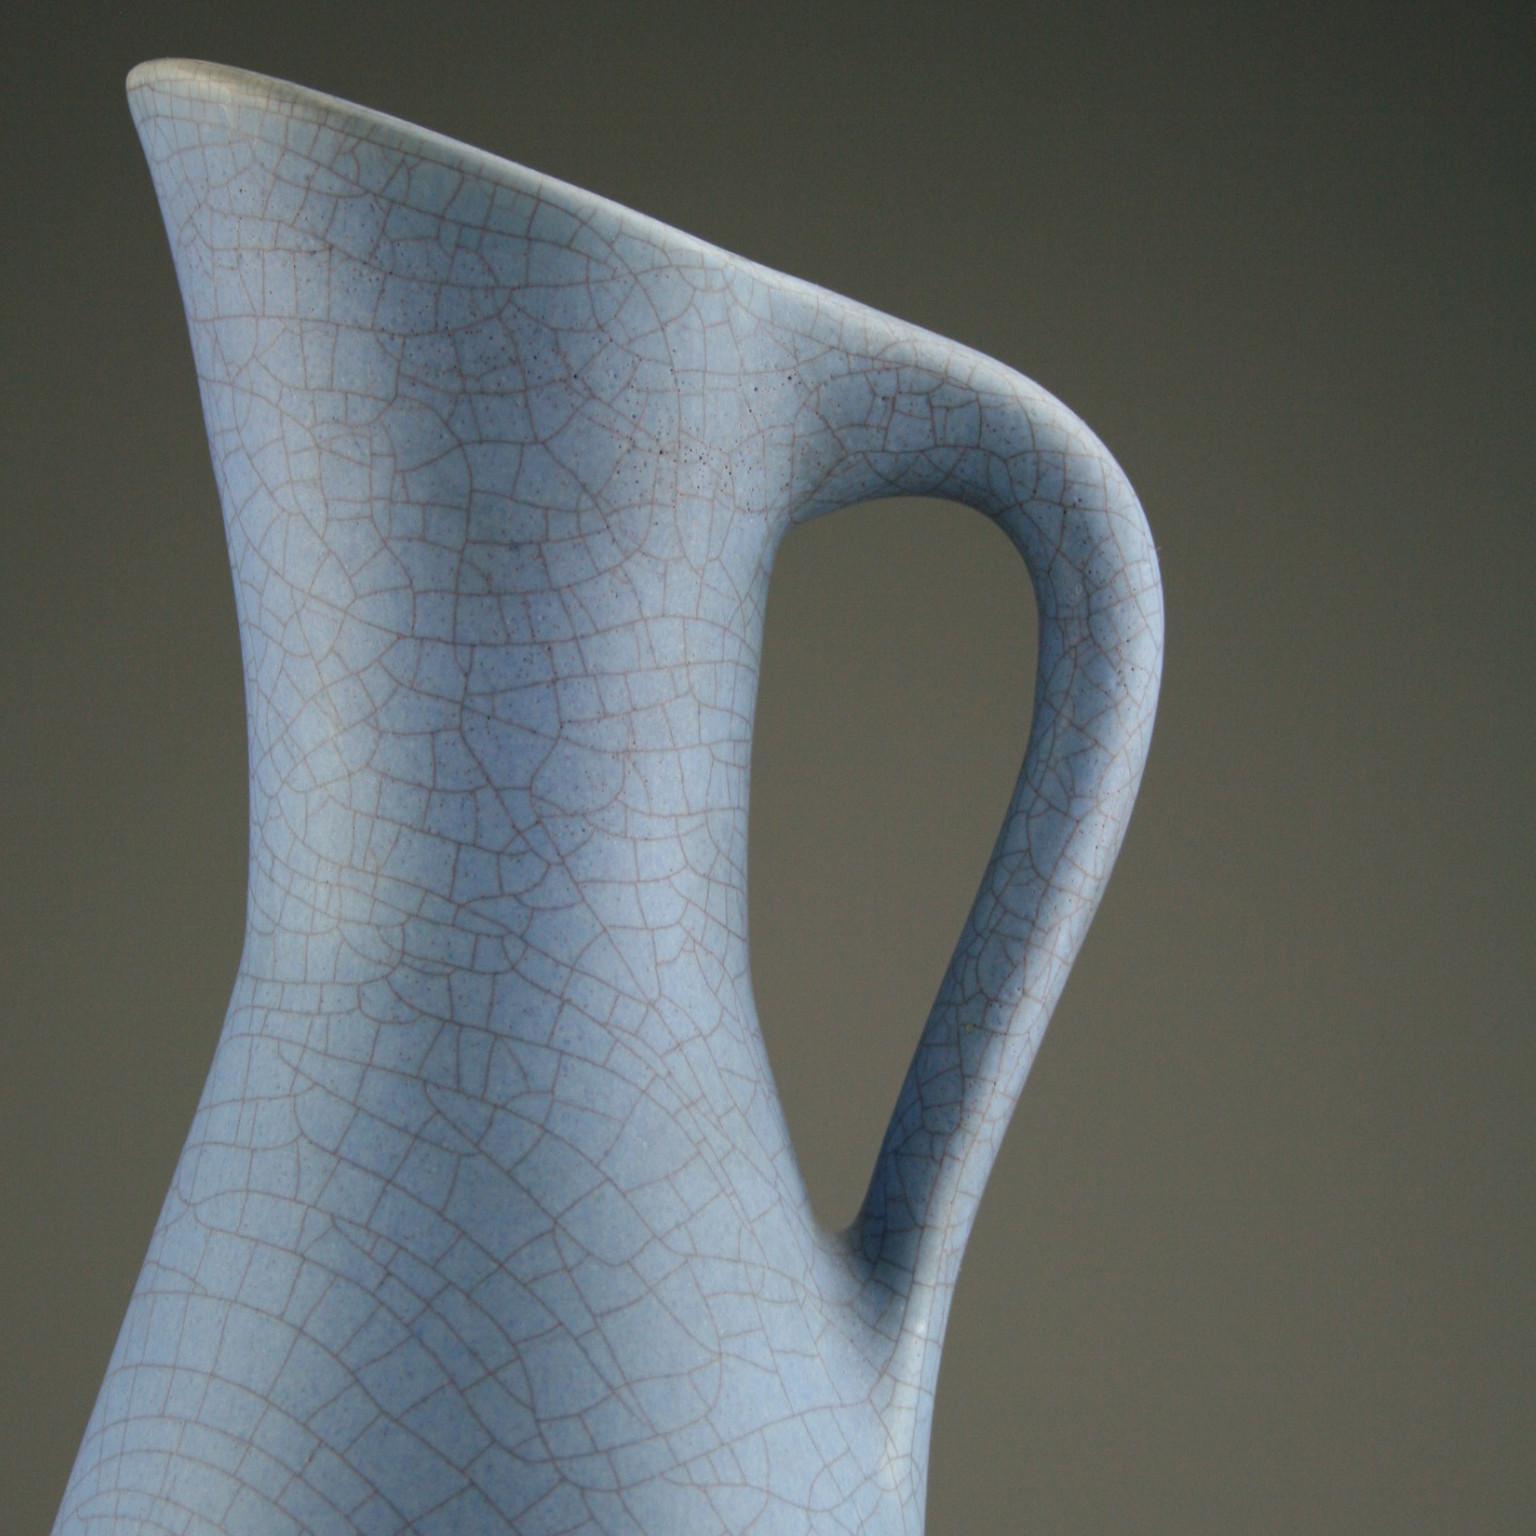 A large pitcher in pale blue matte crackle-effect glaze by German ceramicist Ernst Lösche (1923-2010).

Ernst Lösche trained with Gustav Frosch between 1945 and 1947 and studied under Academy Professor Karl Lösche, his father. He founded his own